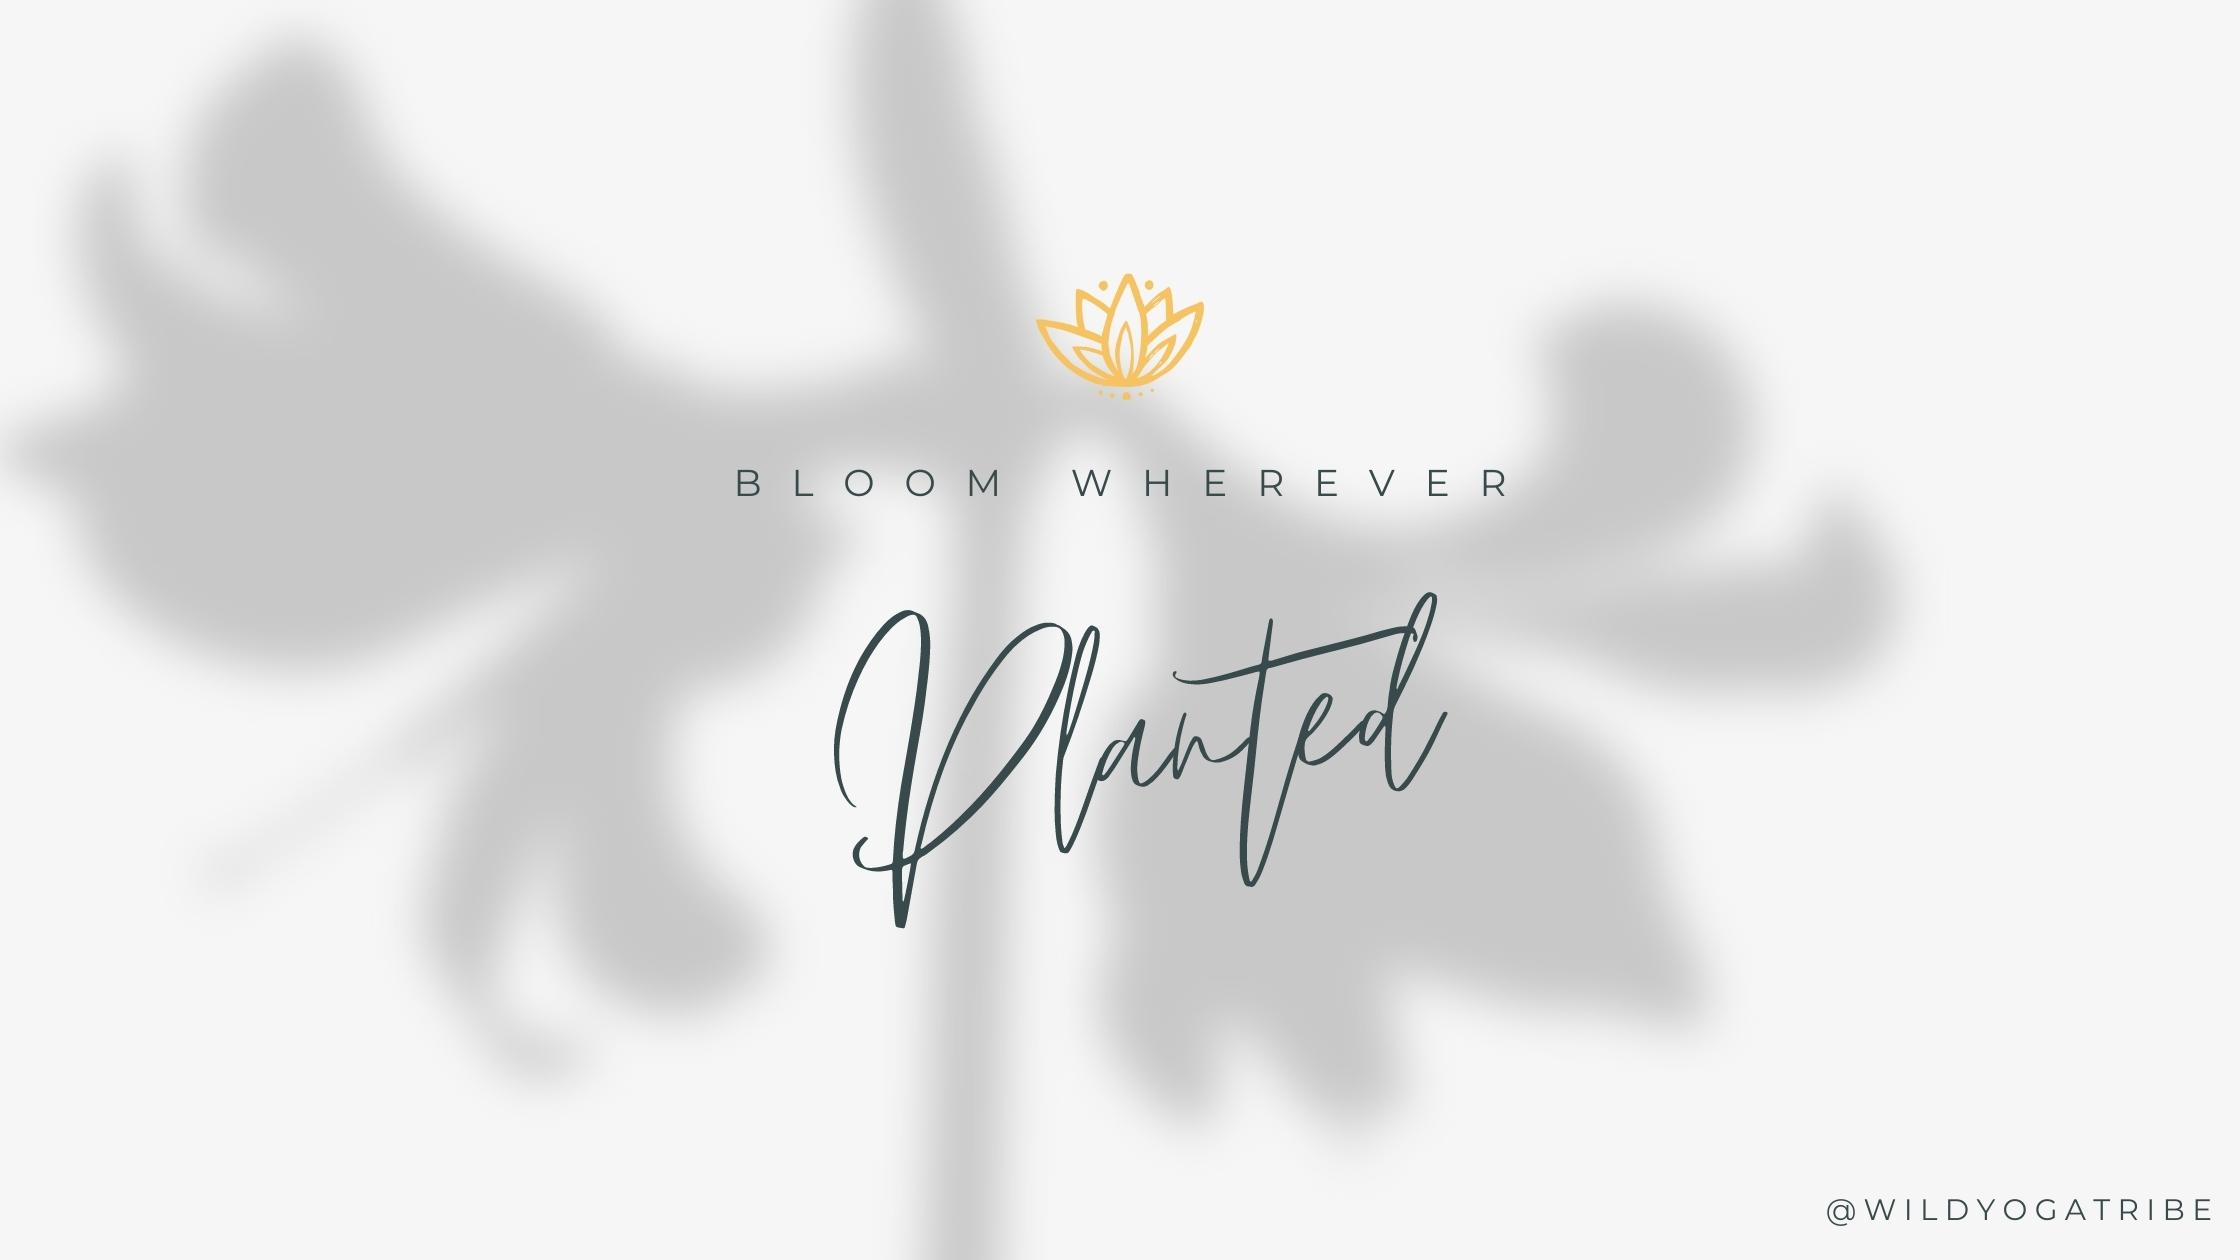 Bloom Wherever Planted